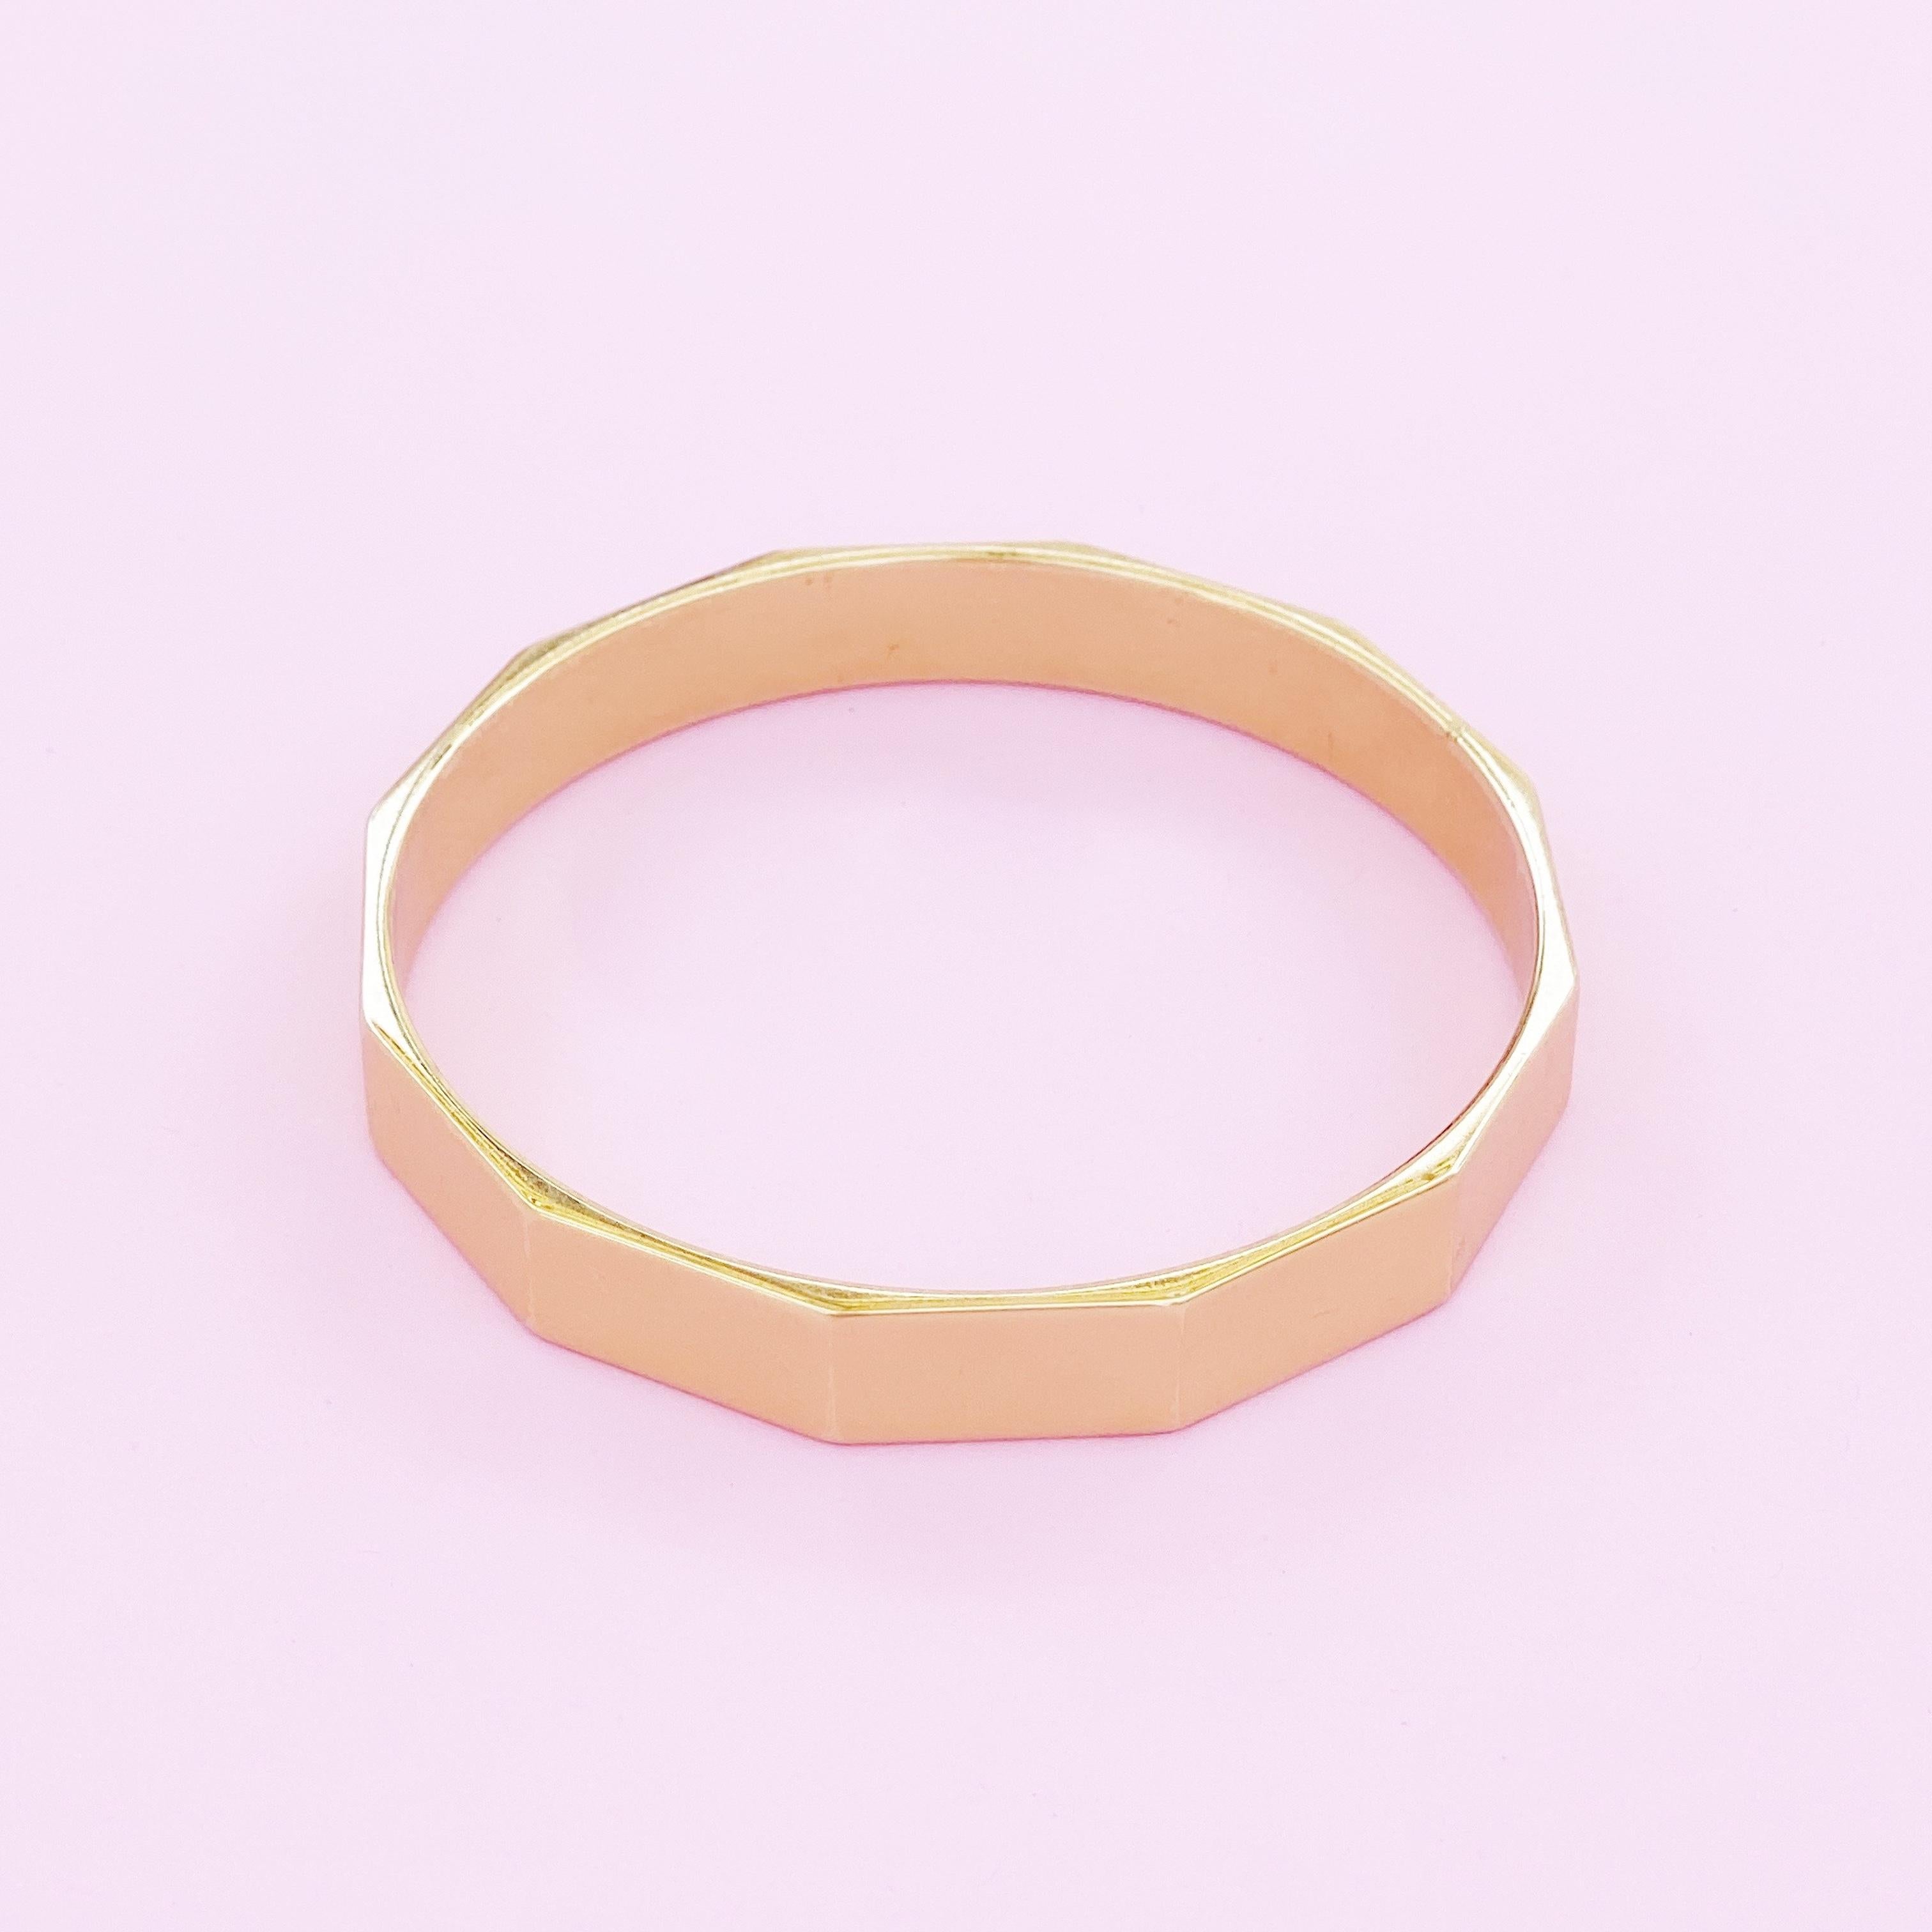 gilded by designs bangle